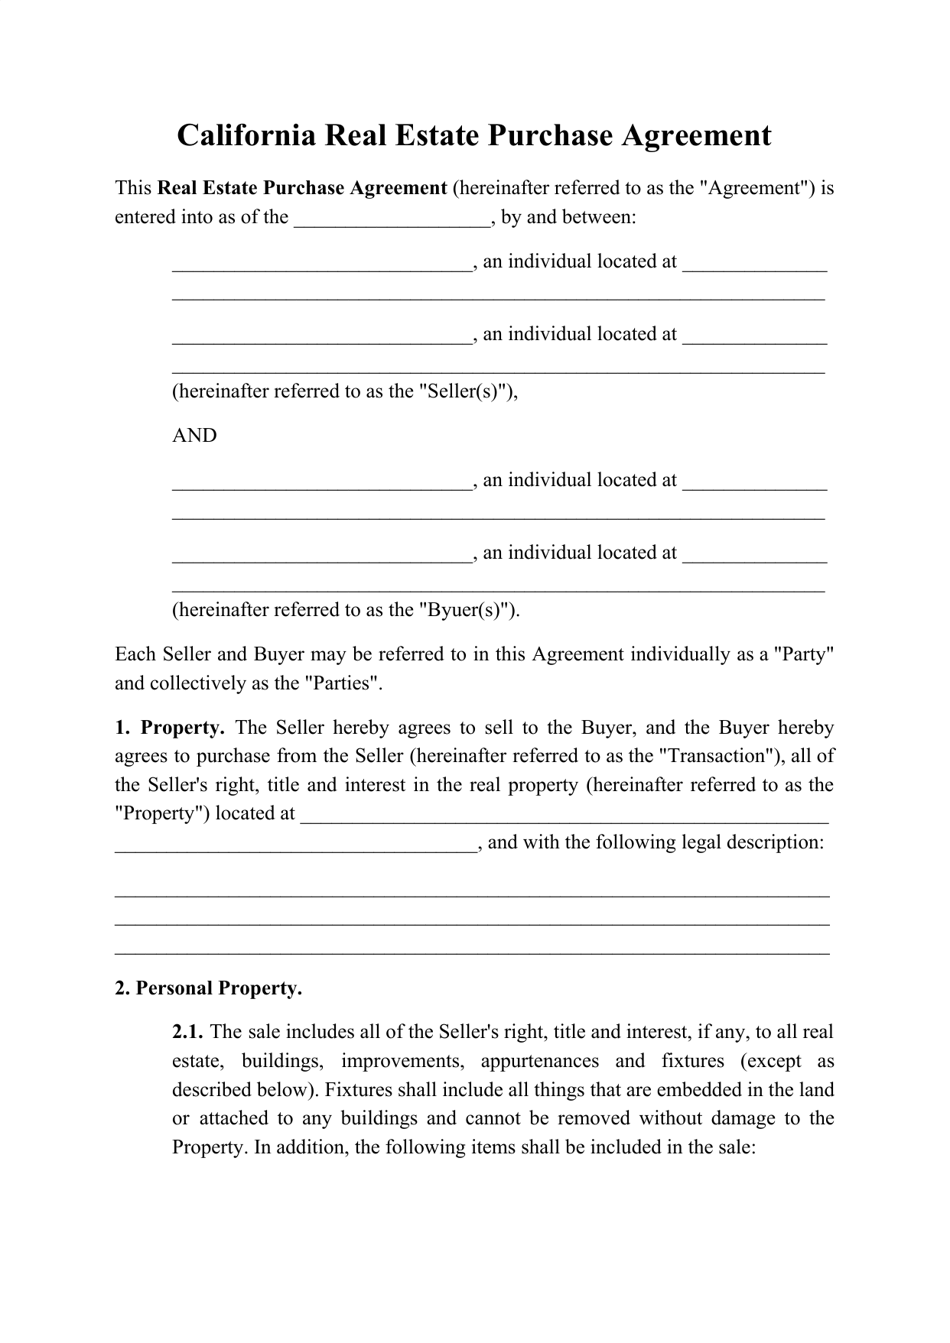 california-real-estate-purchase-agreement-template-fill-out-sign